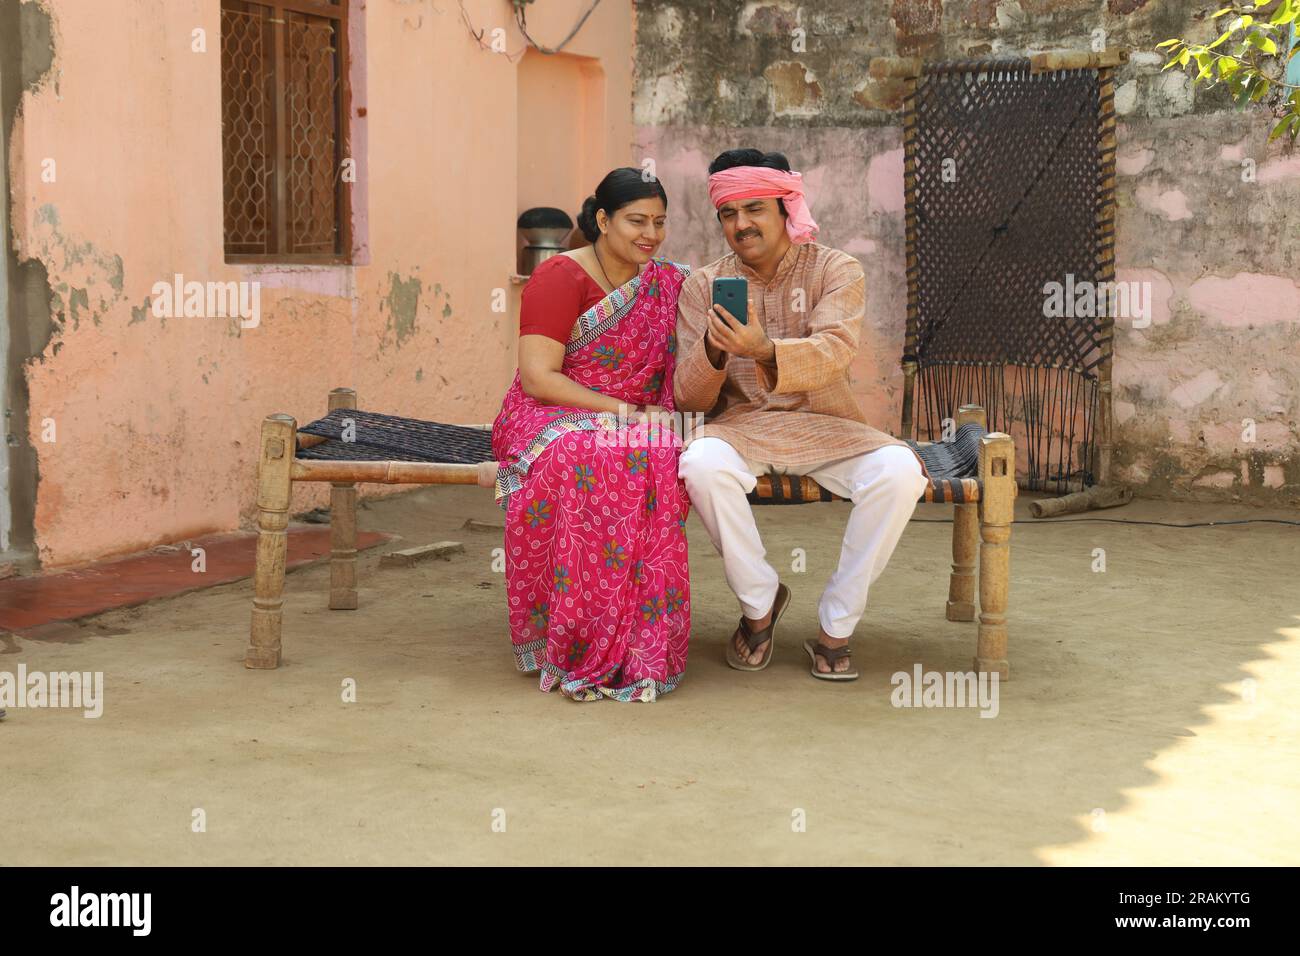 Portrait of Indian rural farmer couple sitting outdoors together in Indian villager's attire holding phone in hand. Stock Photo